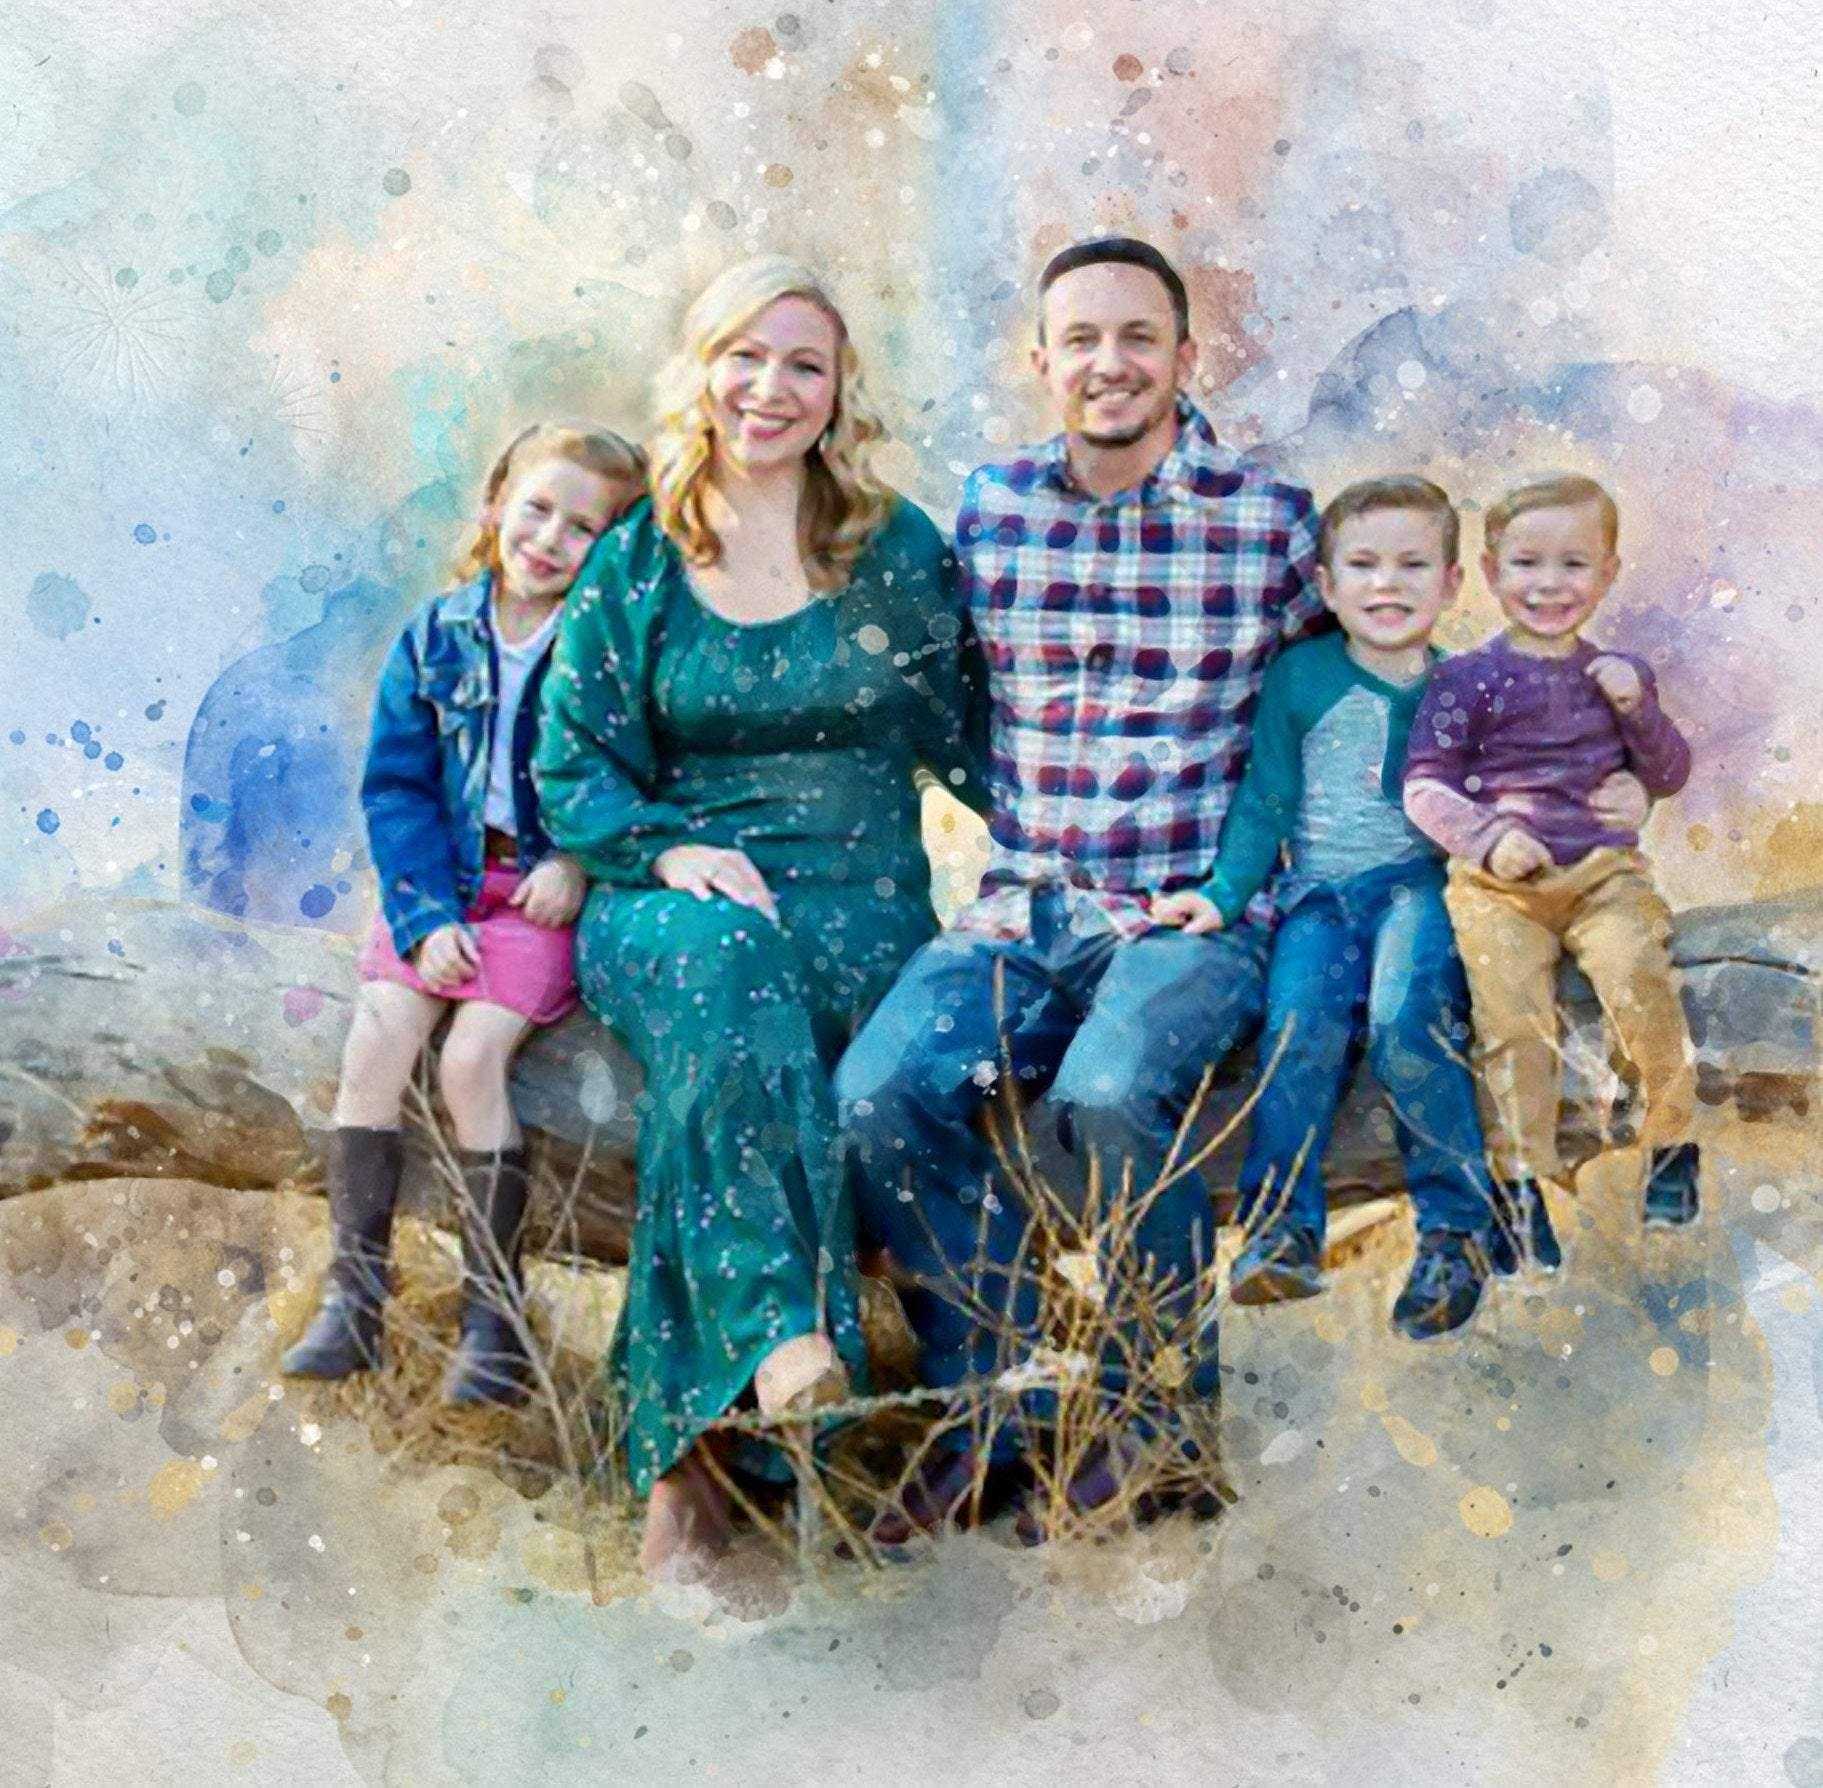 Turn Photo into Painting | Personalized Family Painting from Photo - FromPicToArt